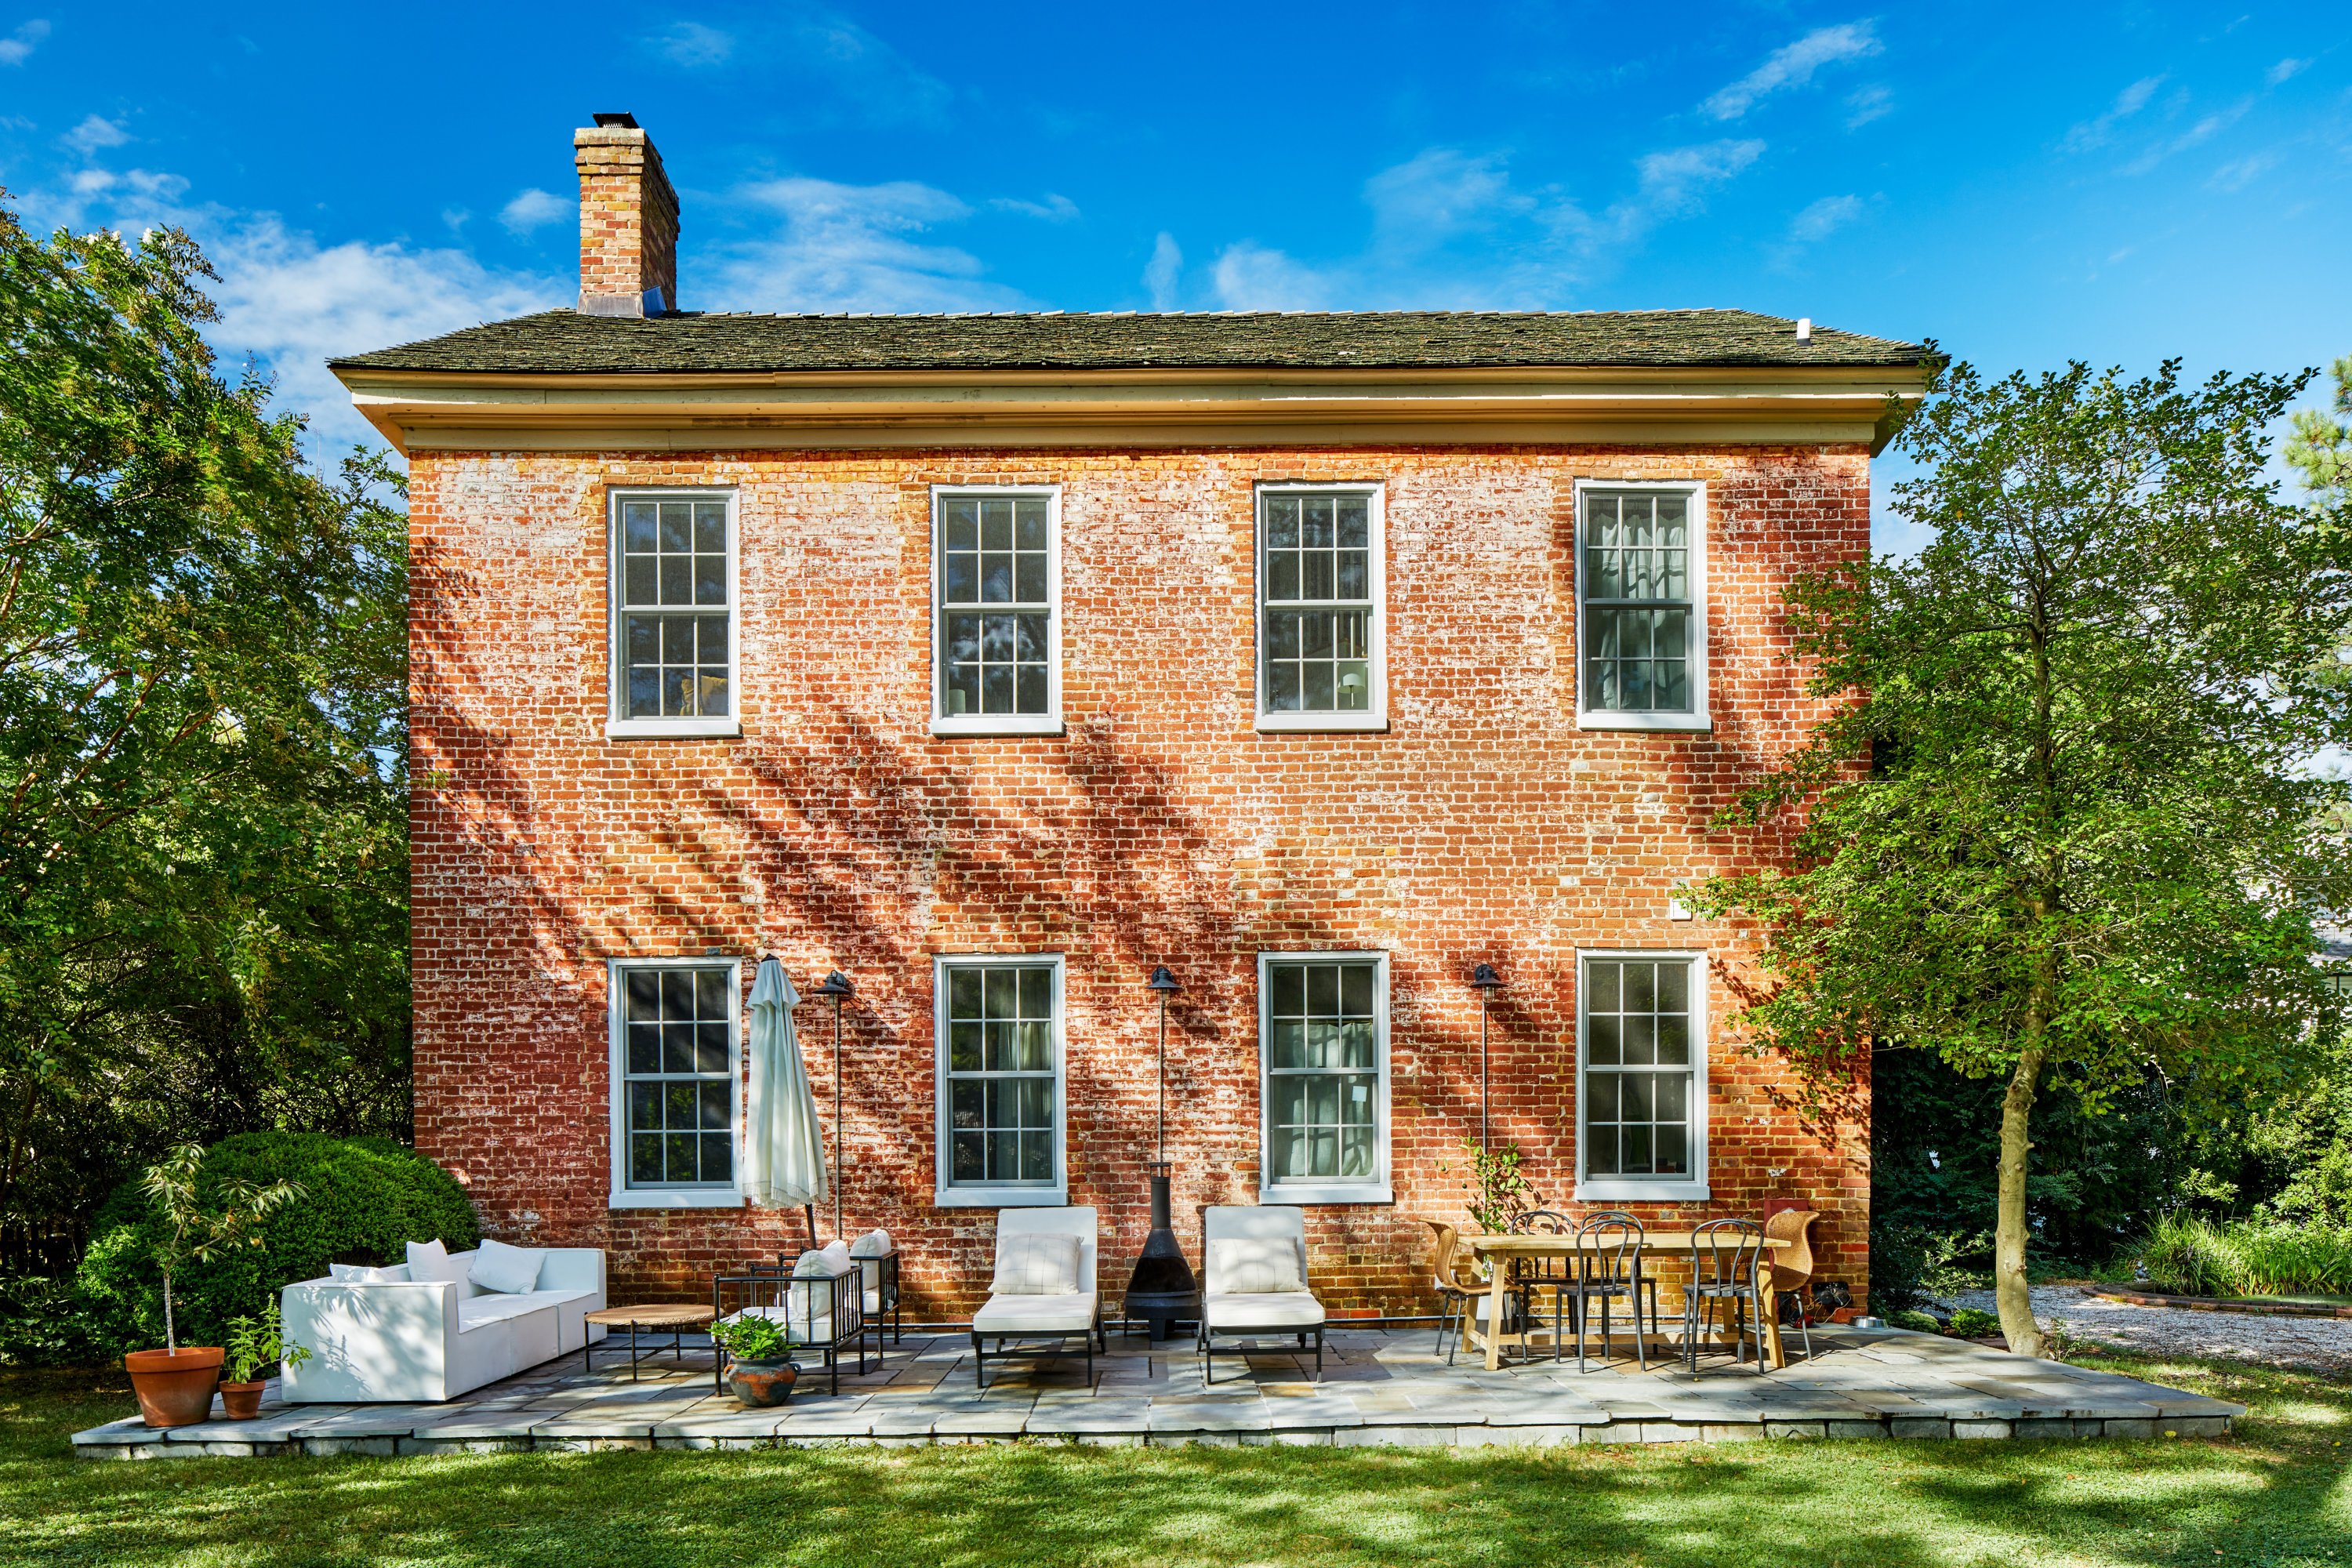 This Soulful Country Home Was Once a 19th-Century Schoolhouse